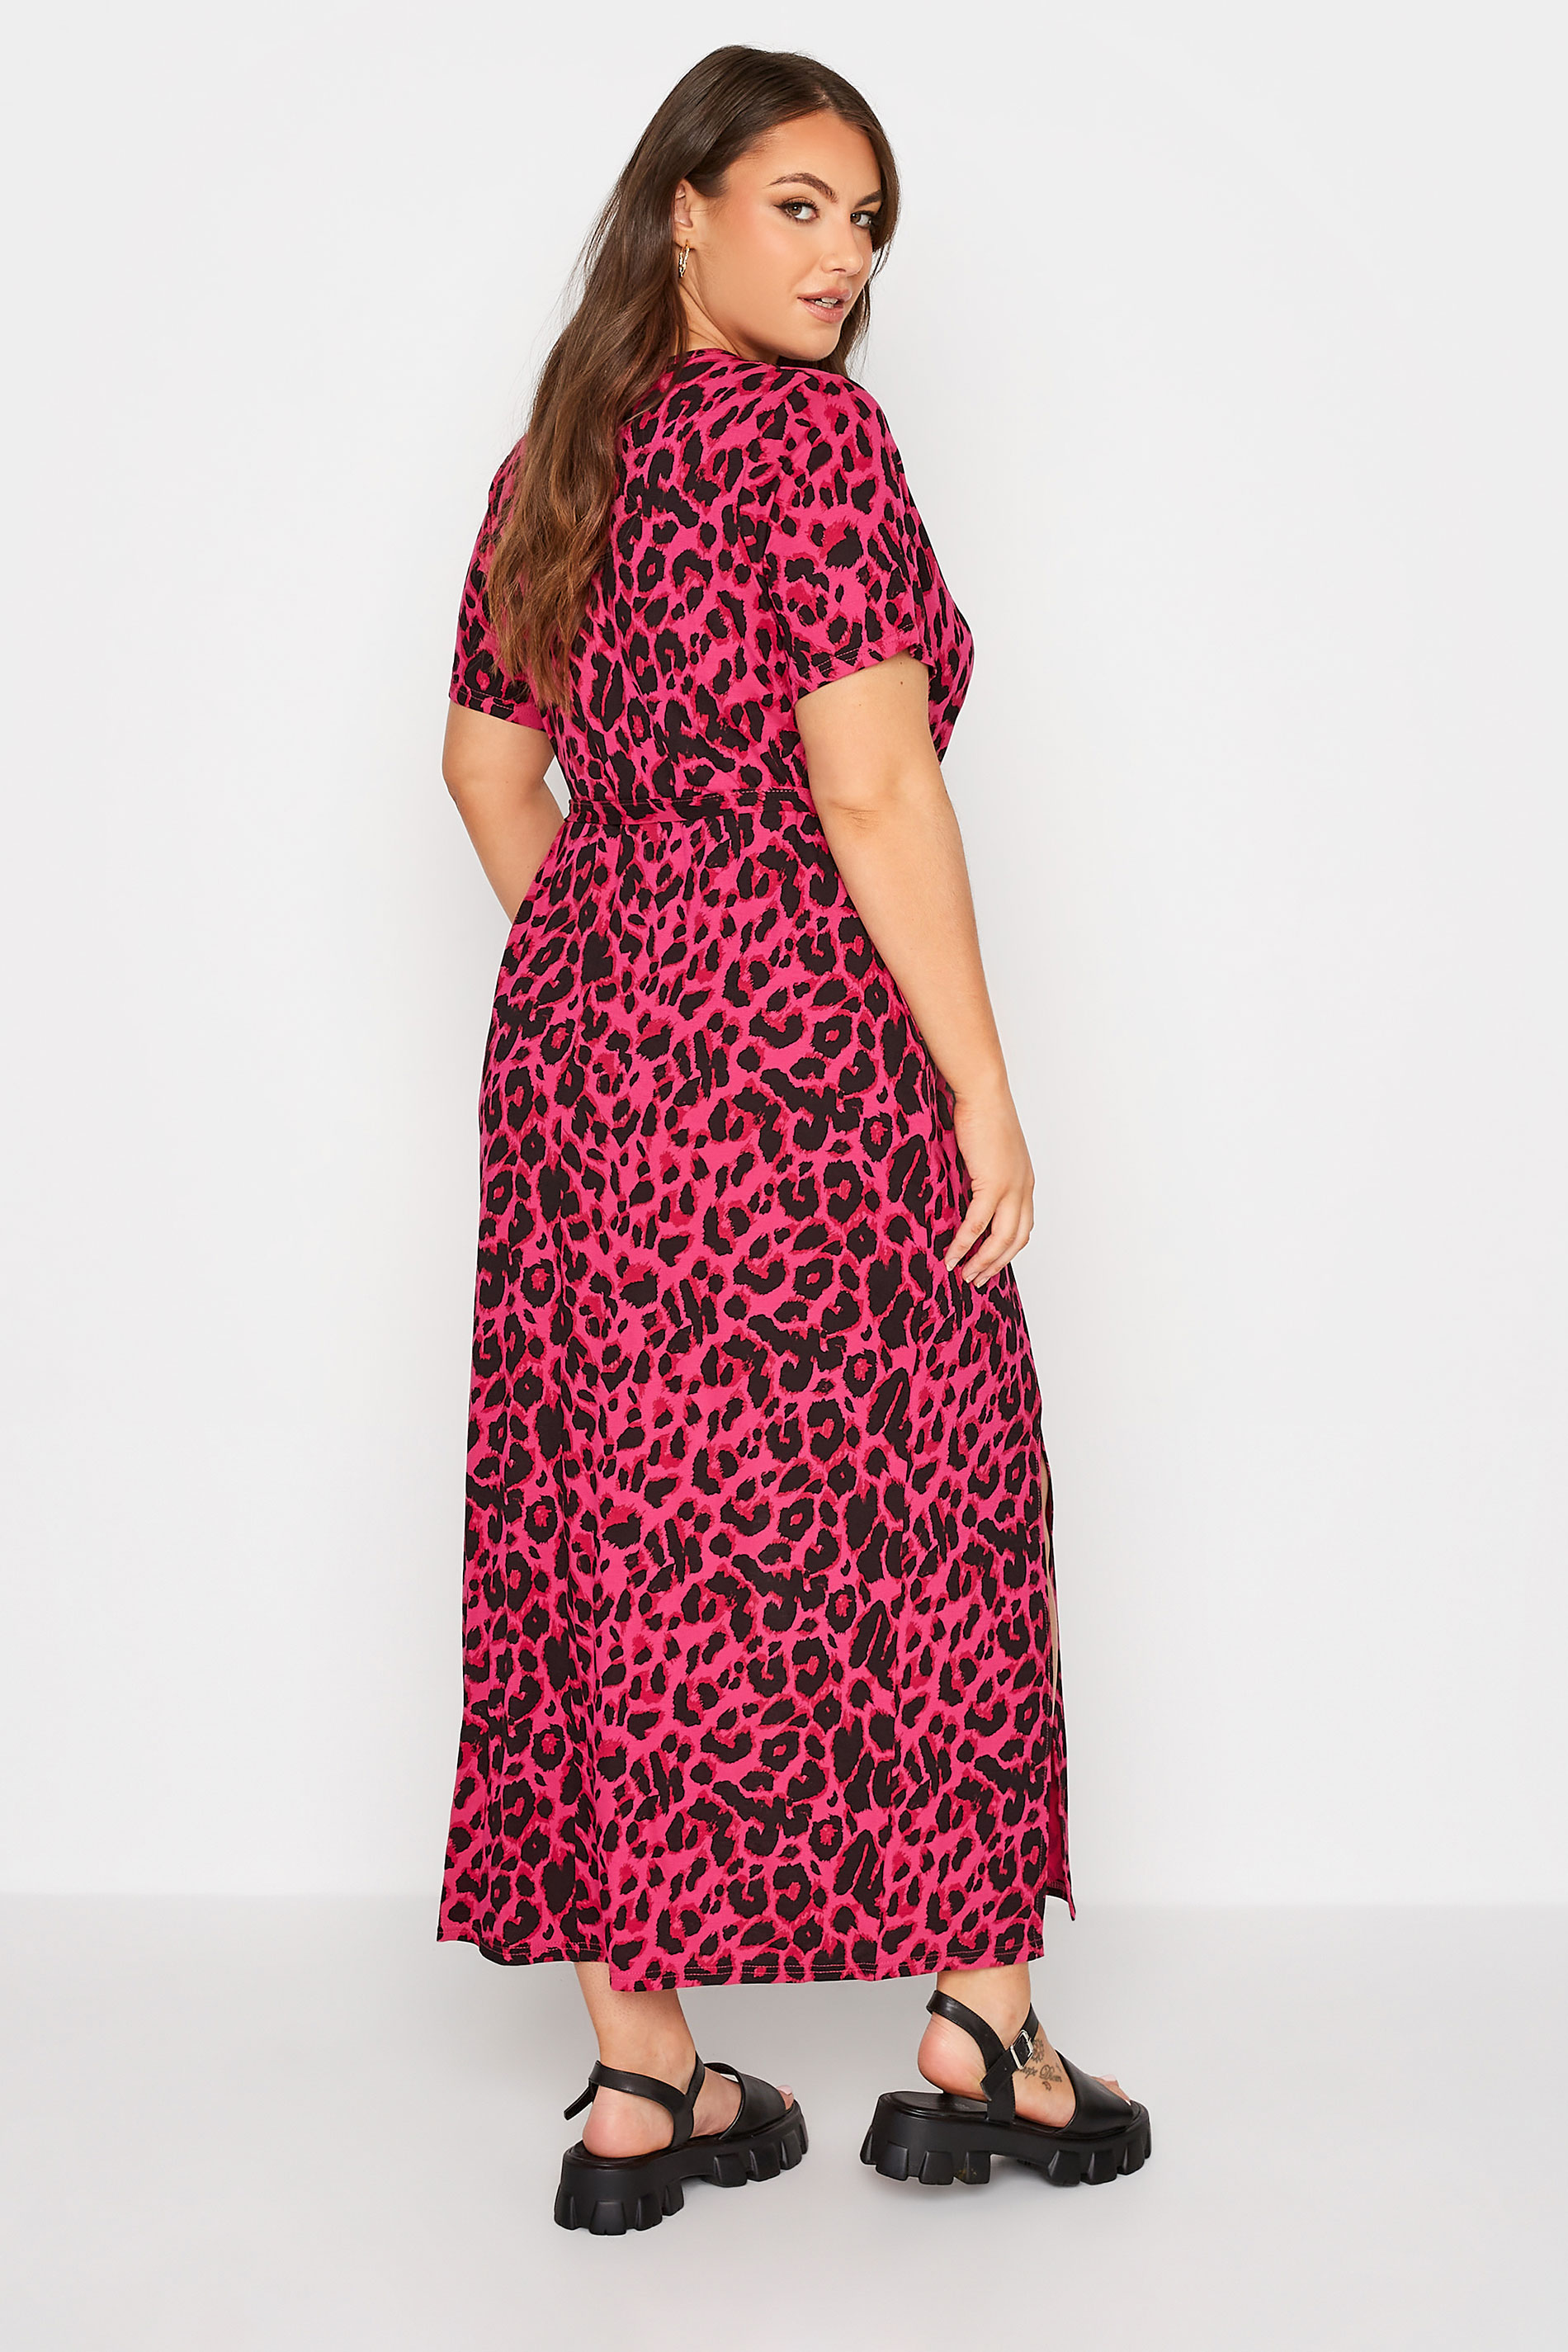 LIMITED COLLECTION Size Pink Leopard Print Maxi Dress | Yours Clothing